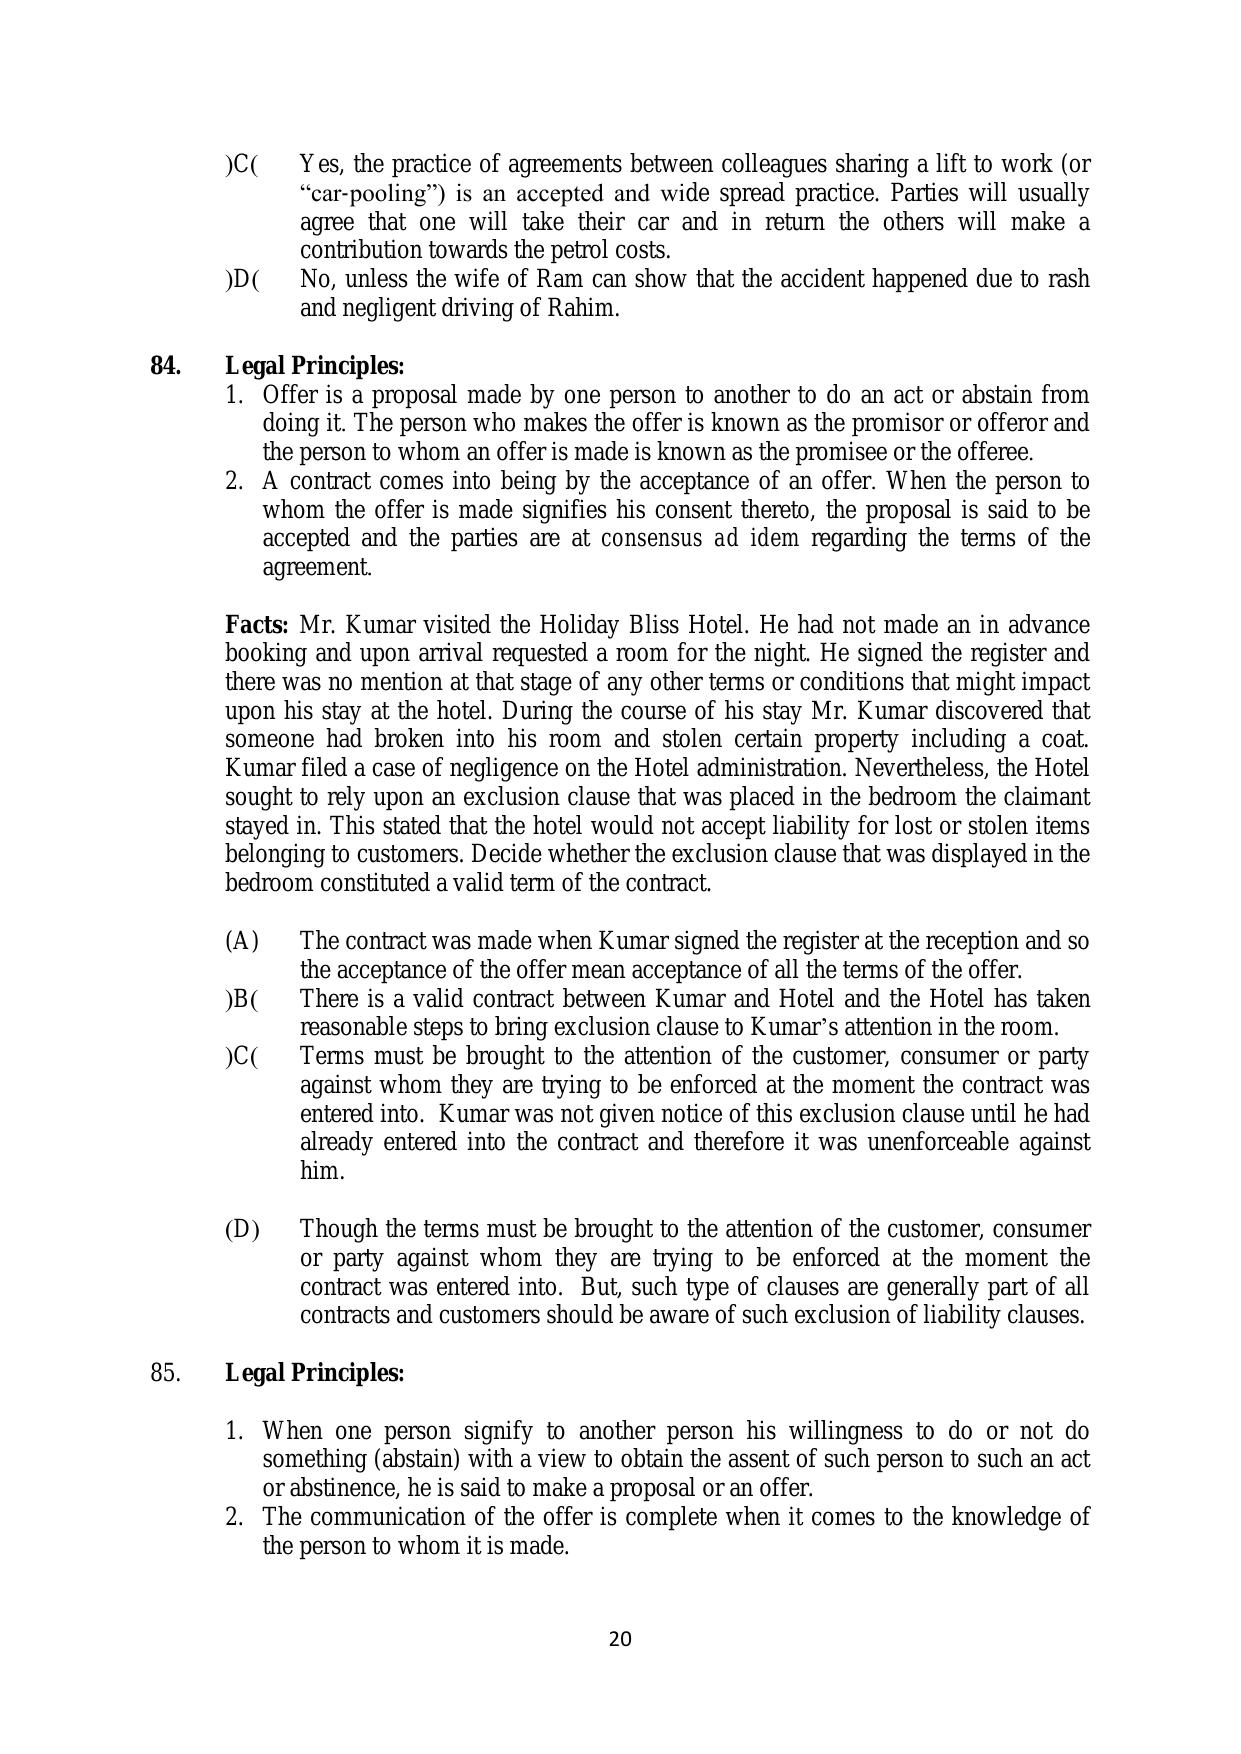 AILET 2020 Question Paper for BA LLB - Page 20